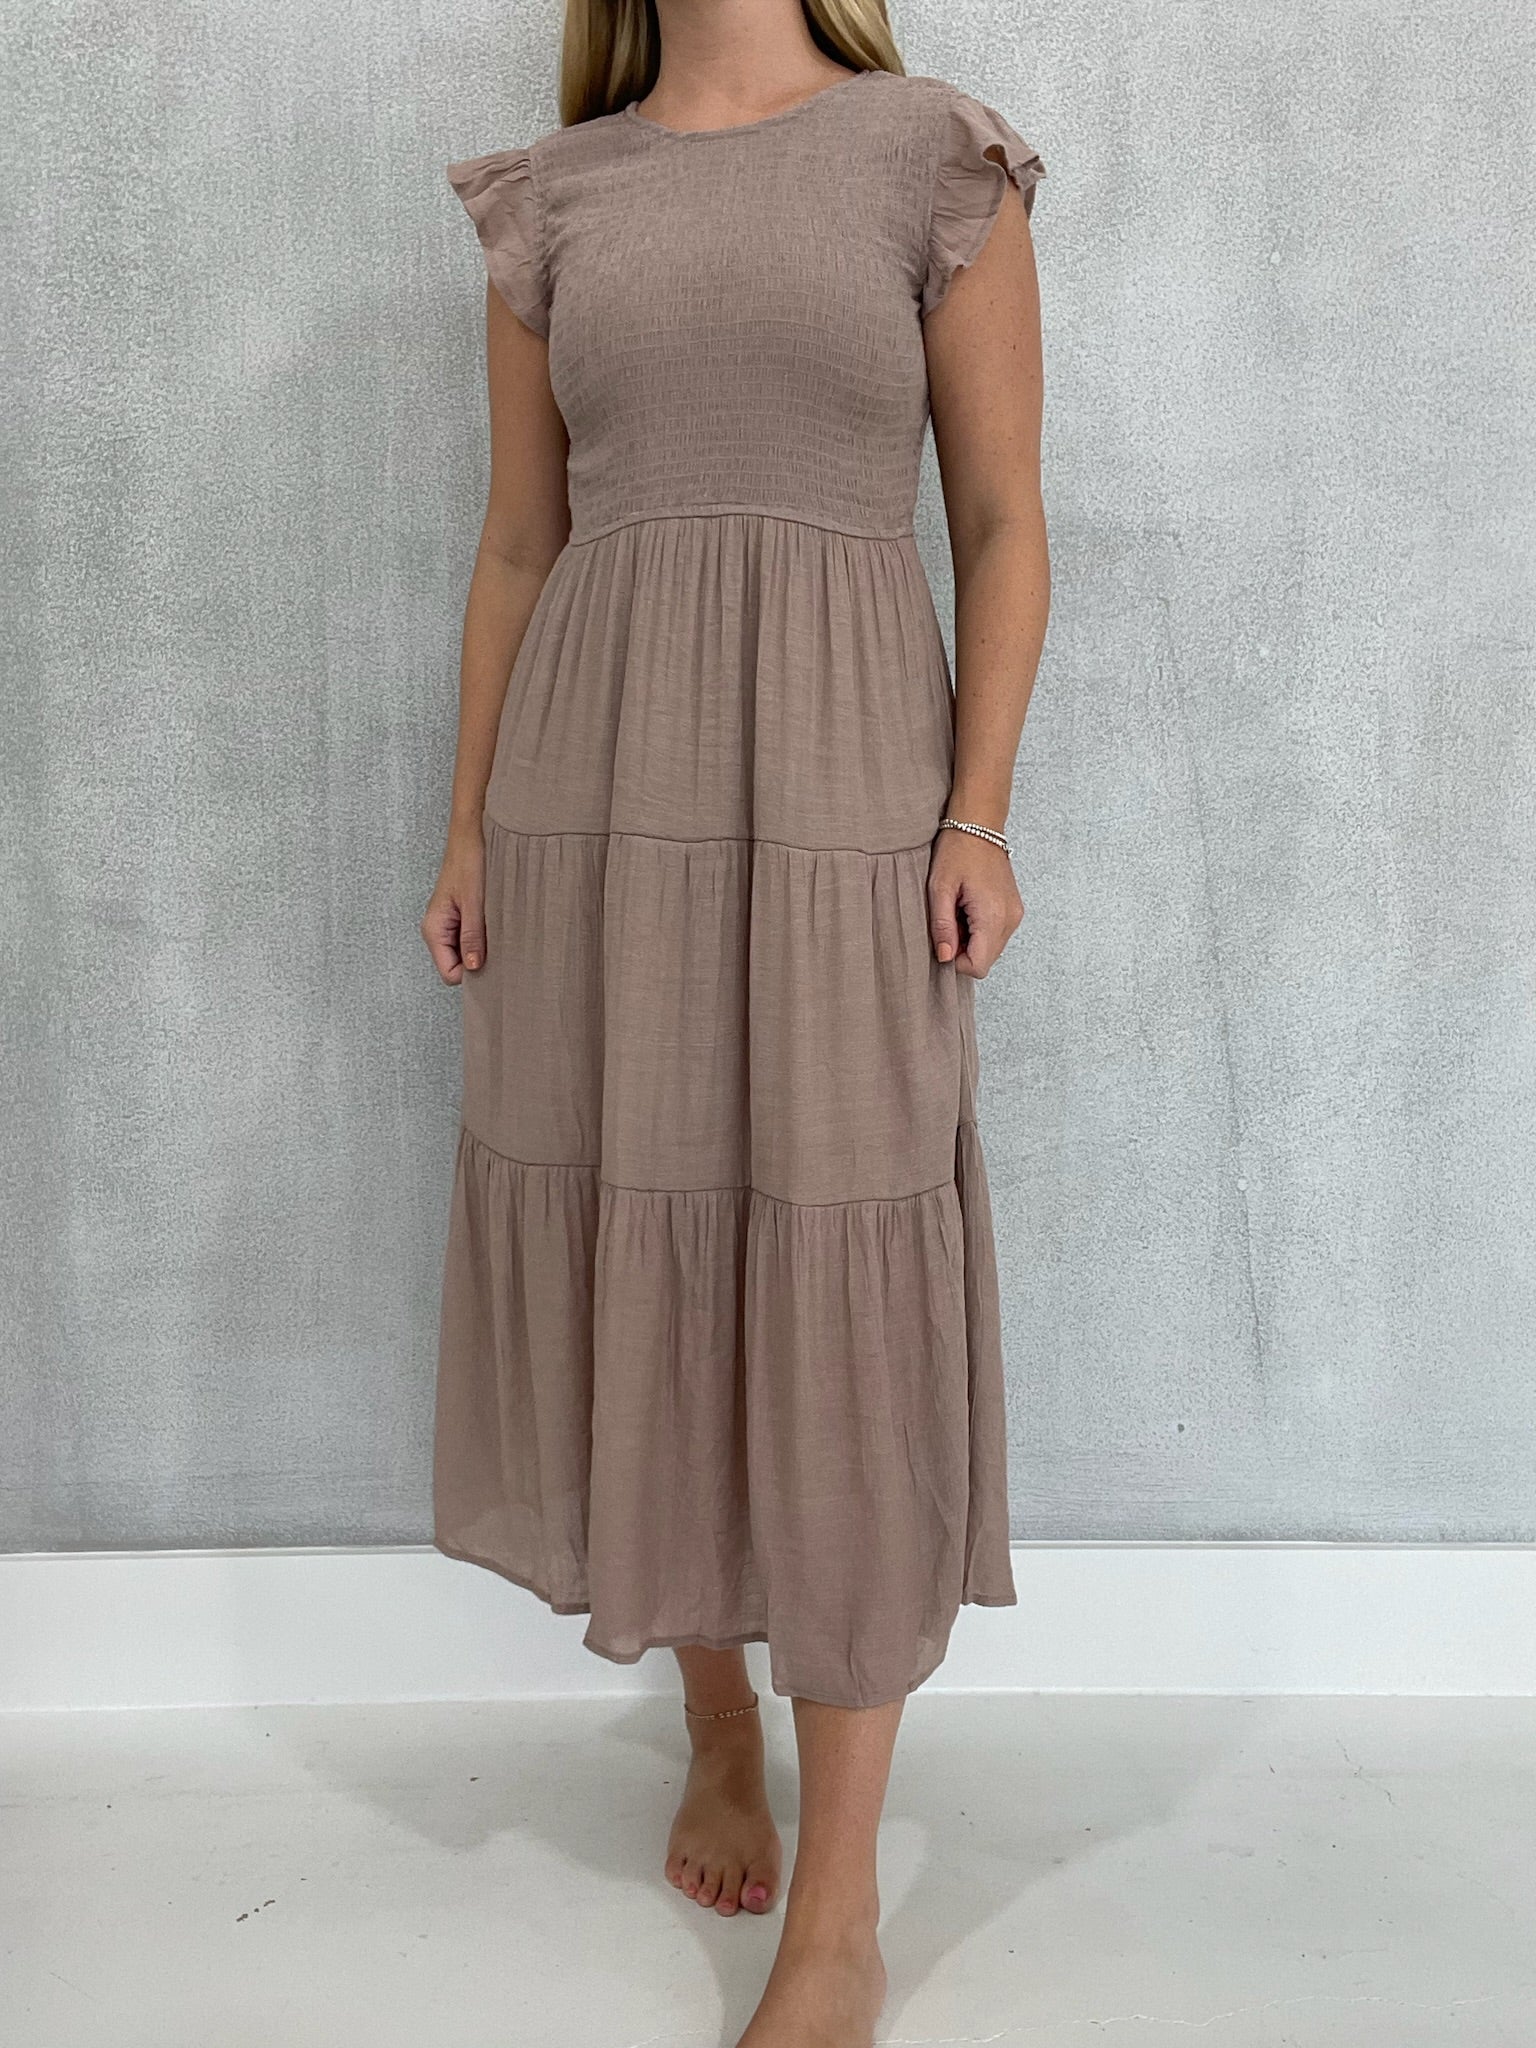 High Road Dress - Taupe